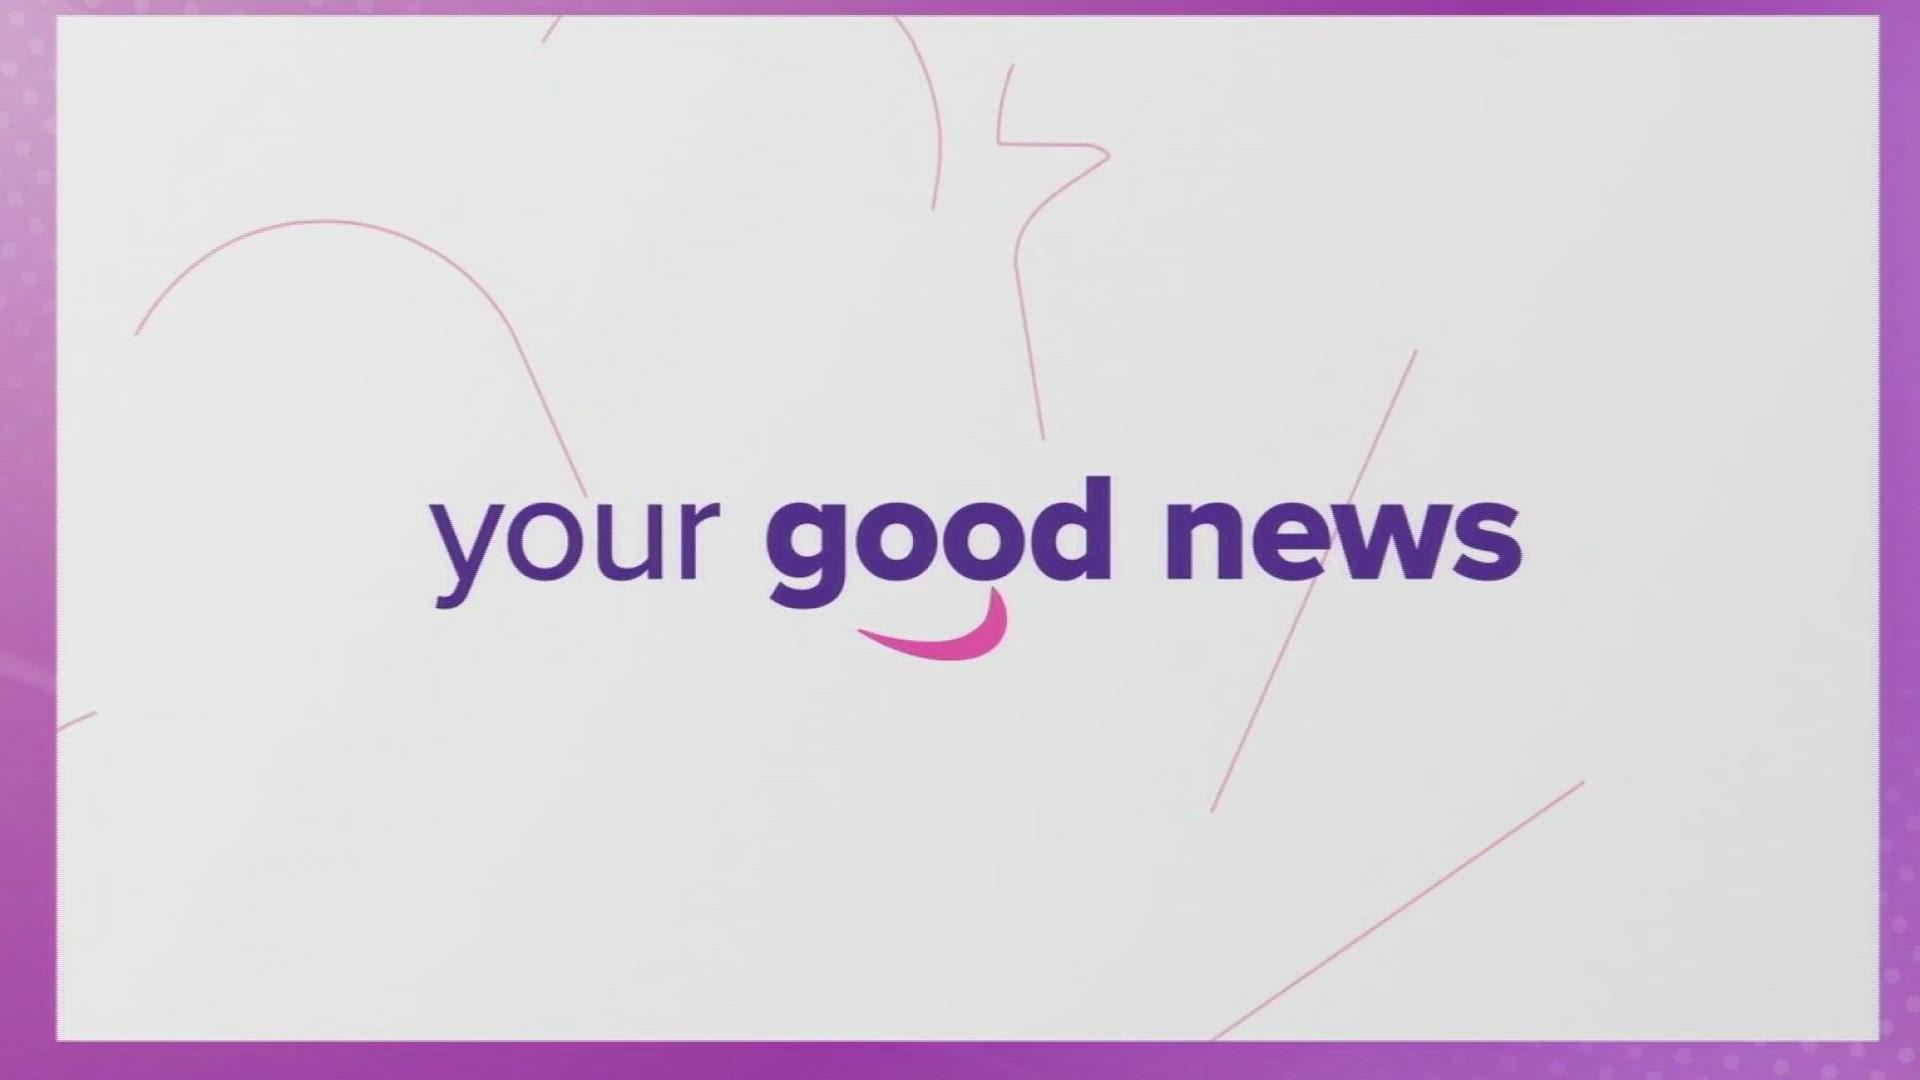 Share your good news with us by using the hashtag #GoodNewsCle.